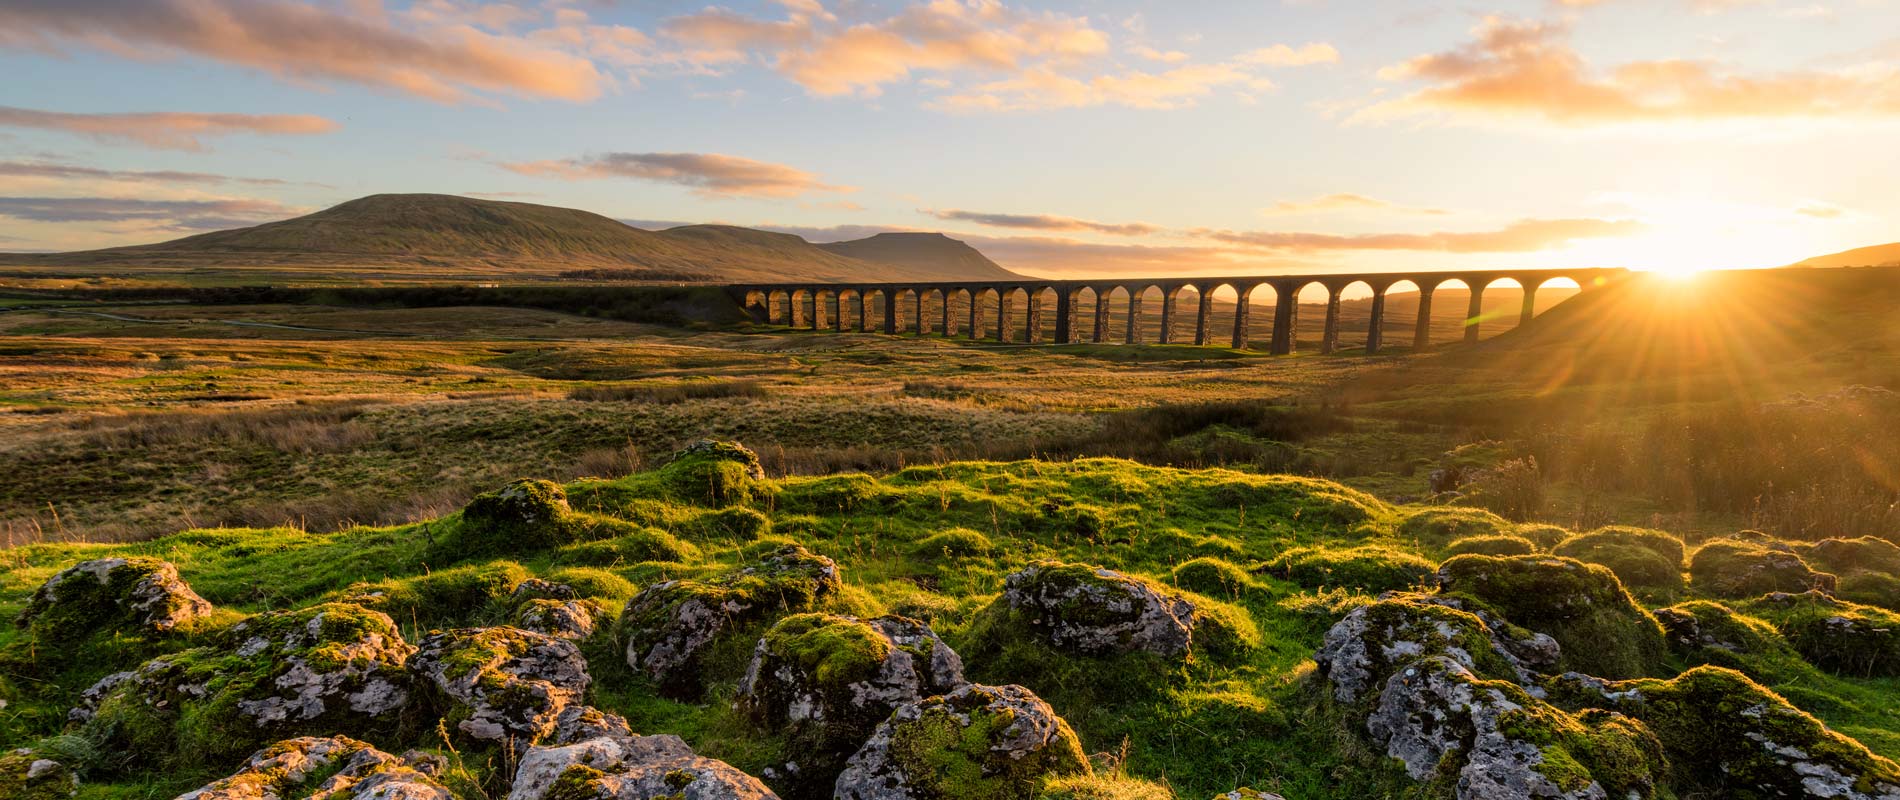 Ribblehead viaduct in North Yorkshire Dales, with moss-covered rocks in the foreground and green open spaces